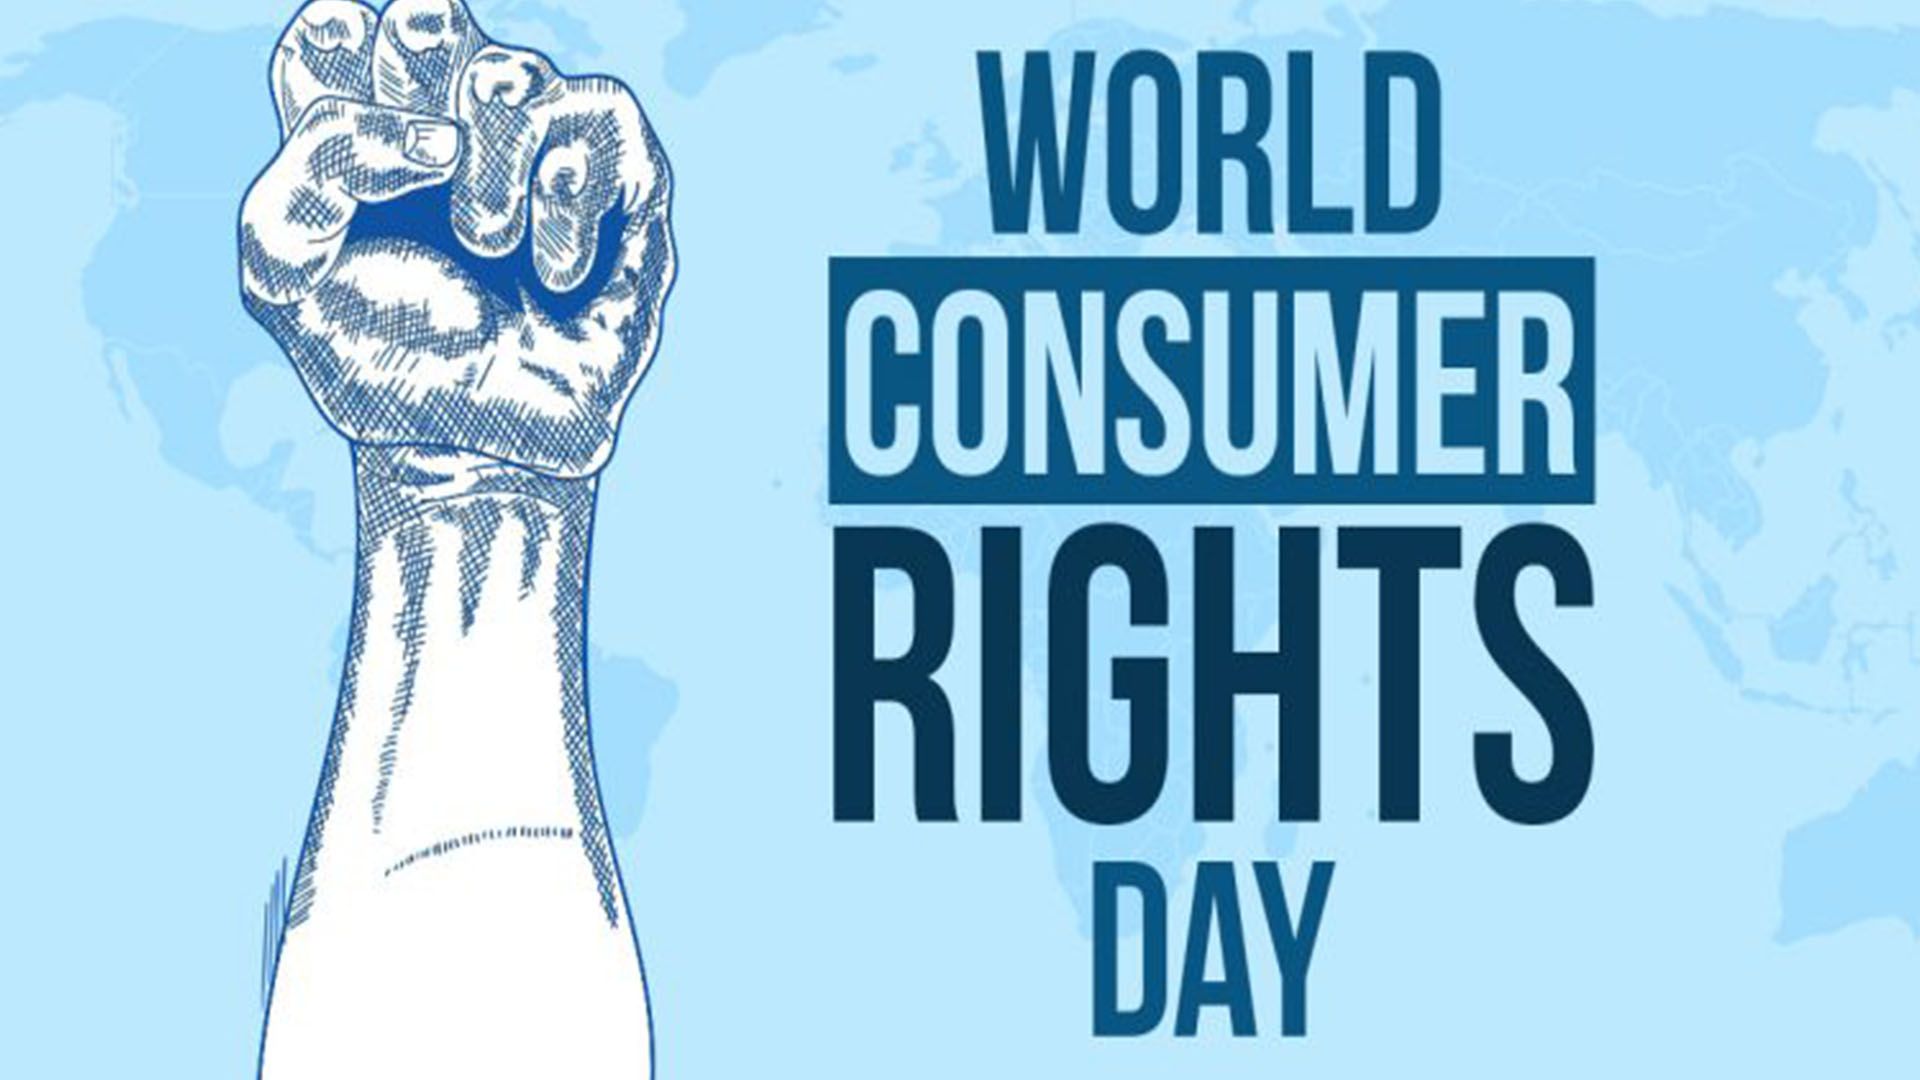 Consumer Rights Day is being celebrated today